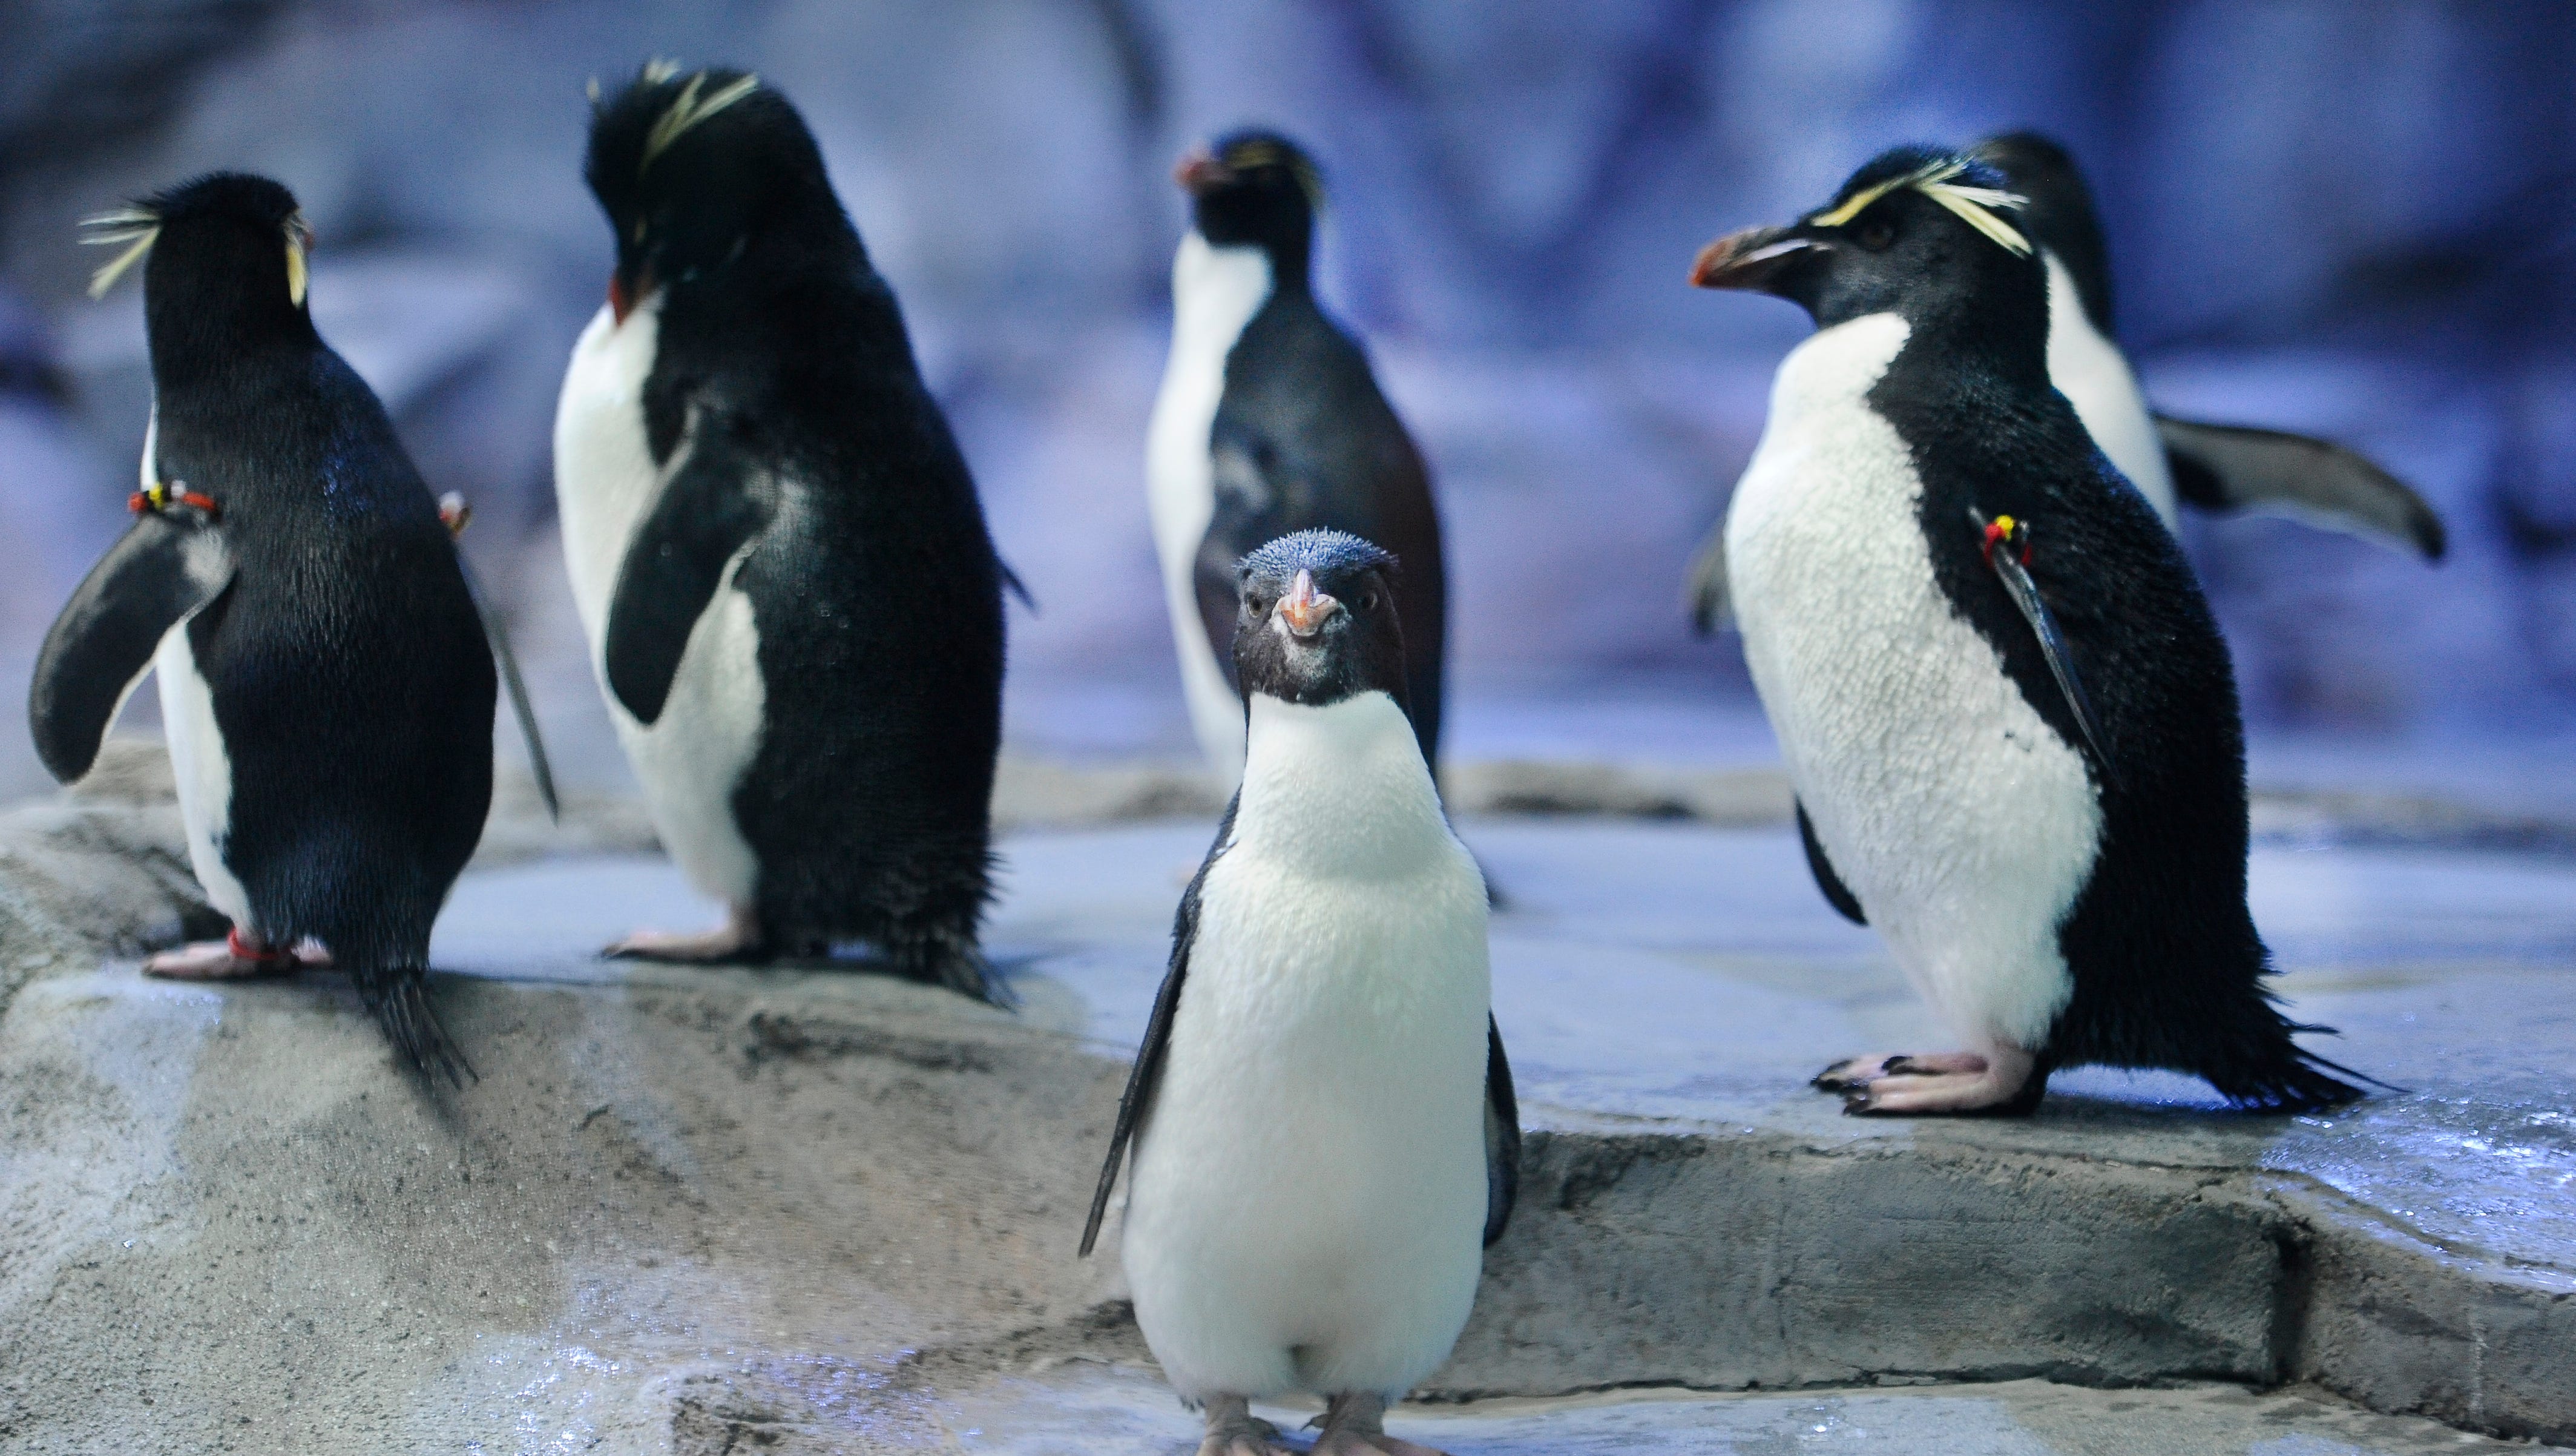 The aquatic area is home to four types of penguins: Southern Rockhoppers, Macaroni, Gentoo and King.